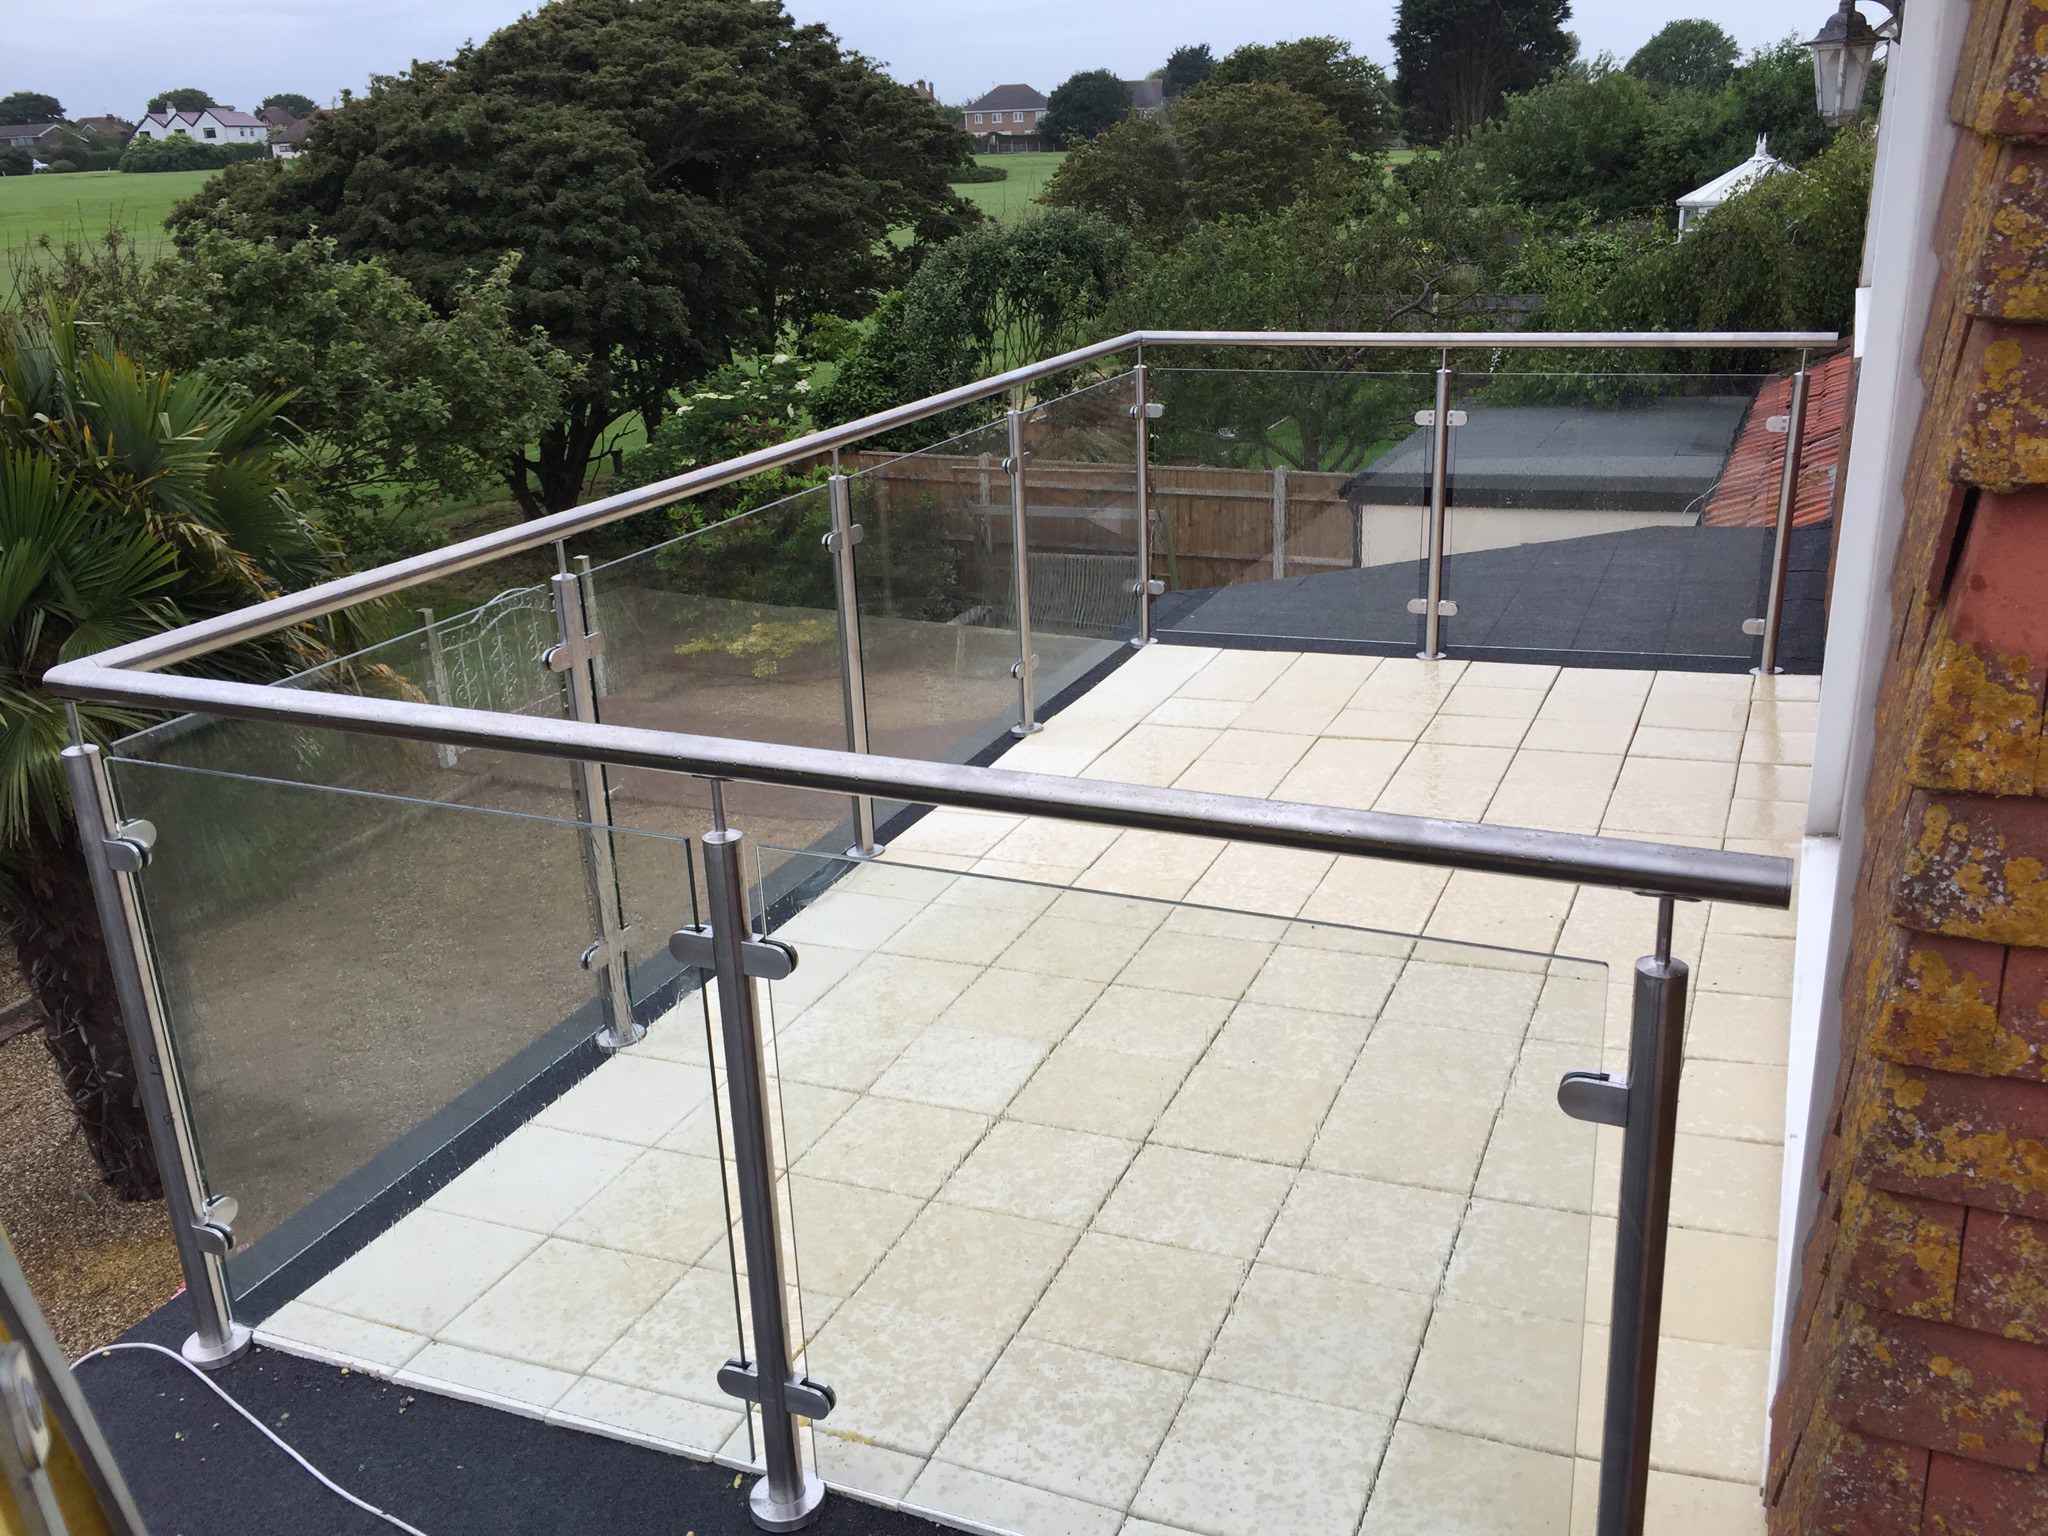 What is the Legal Minimum Handrail height?